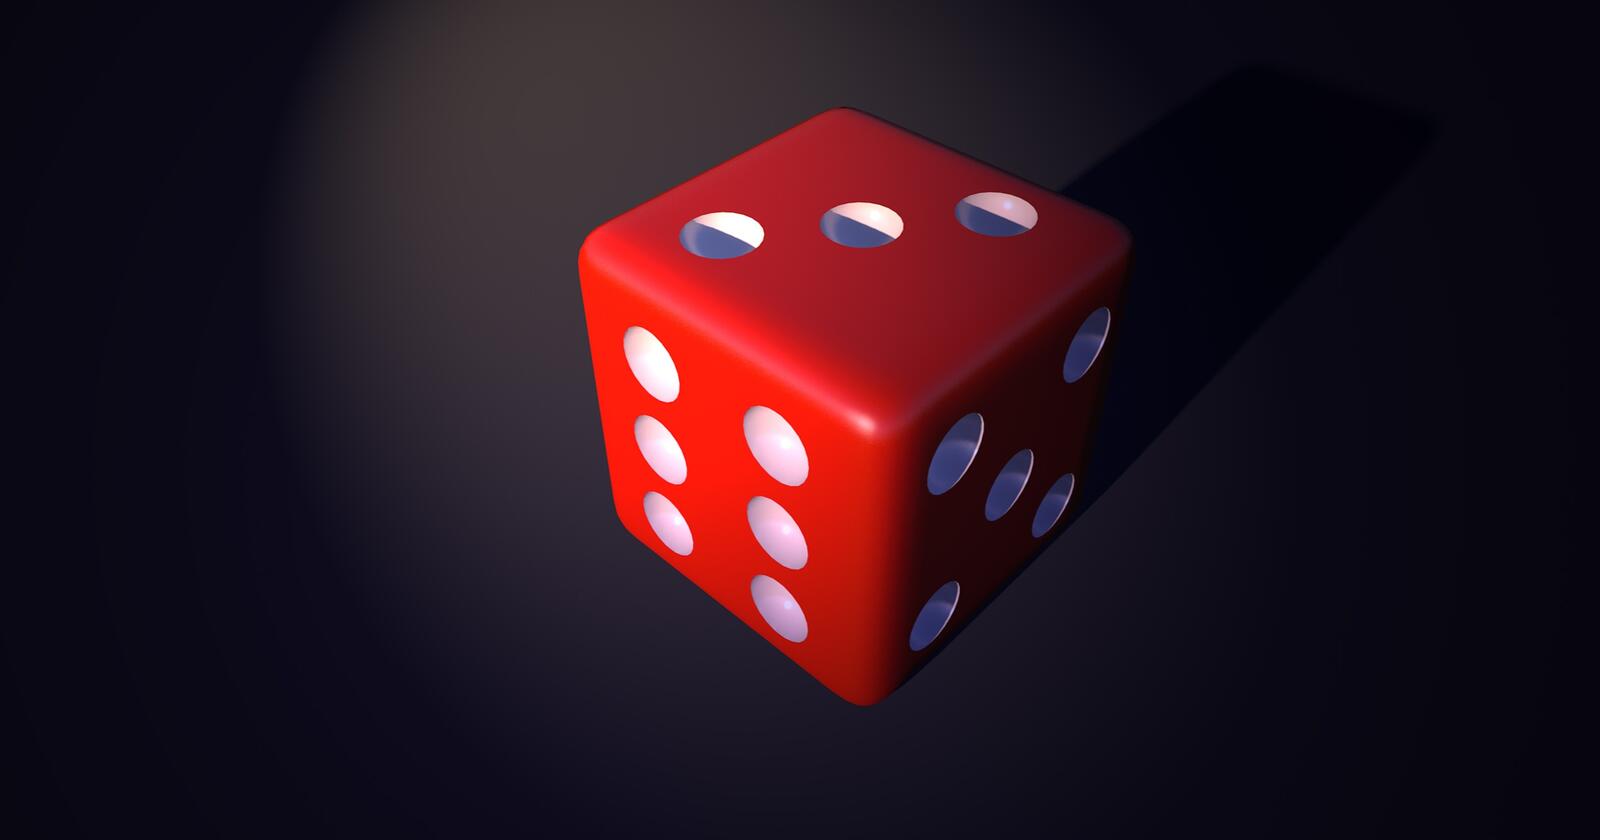 Wallpapers cube red dice on the desktop